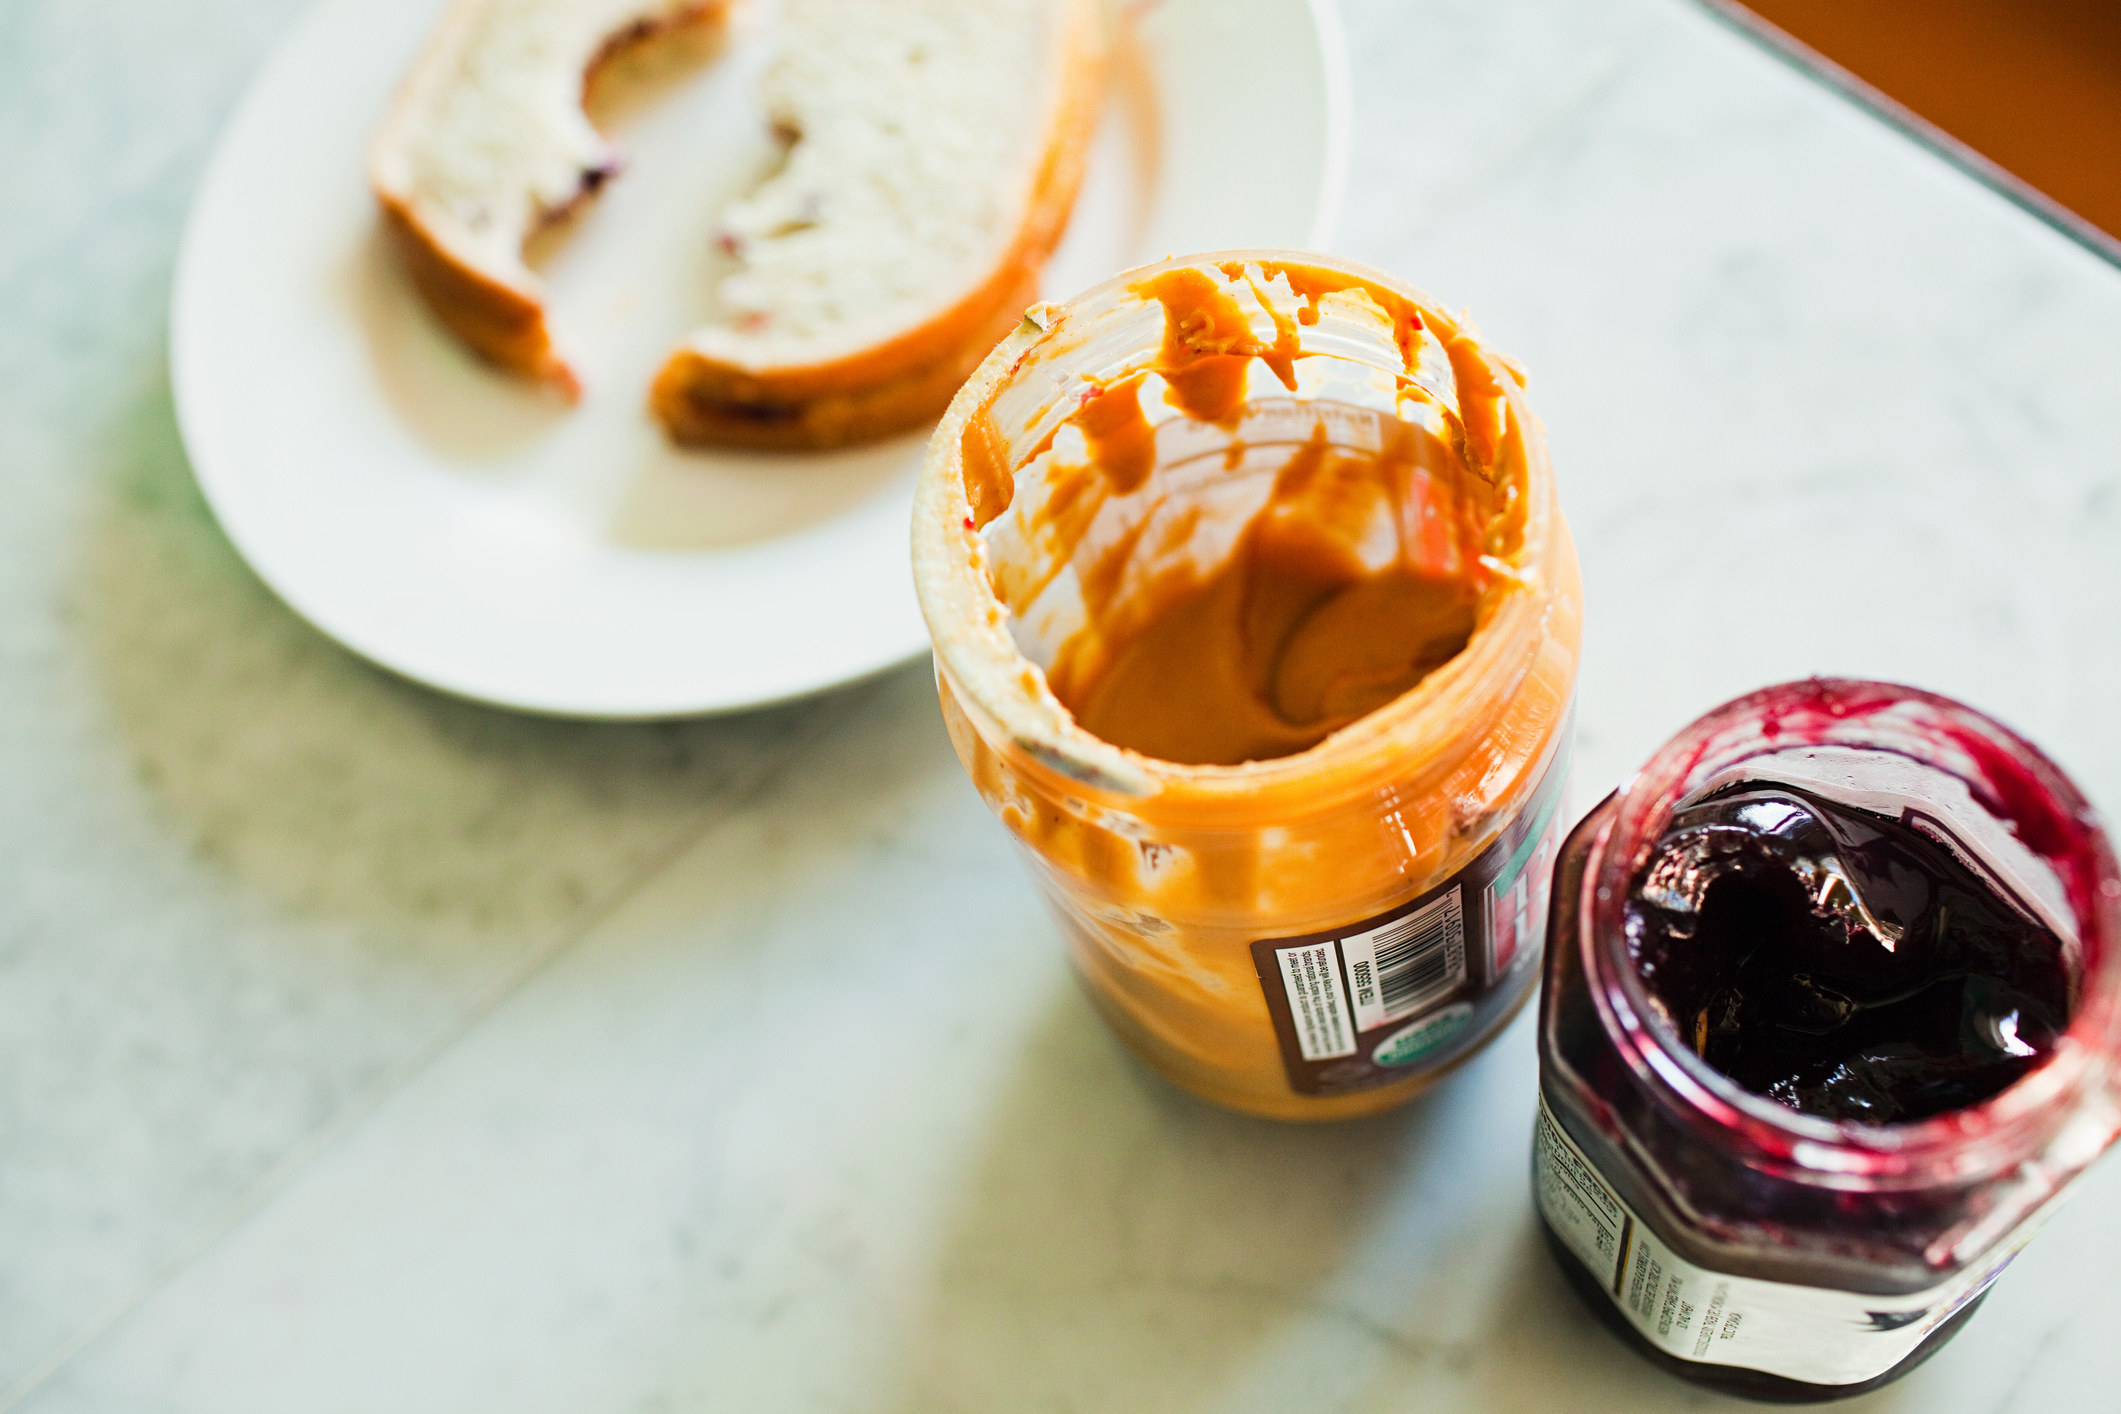 Peanut butter and jelly jar